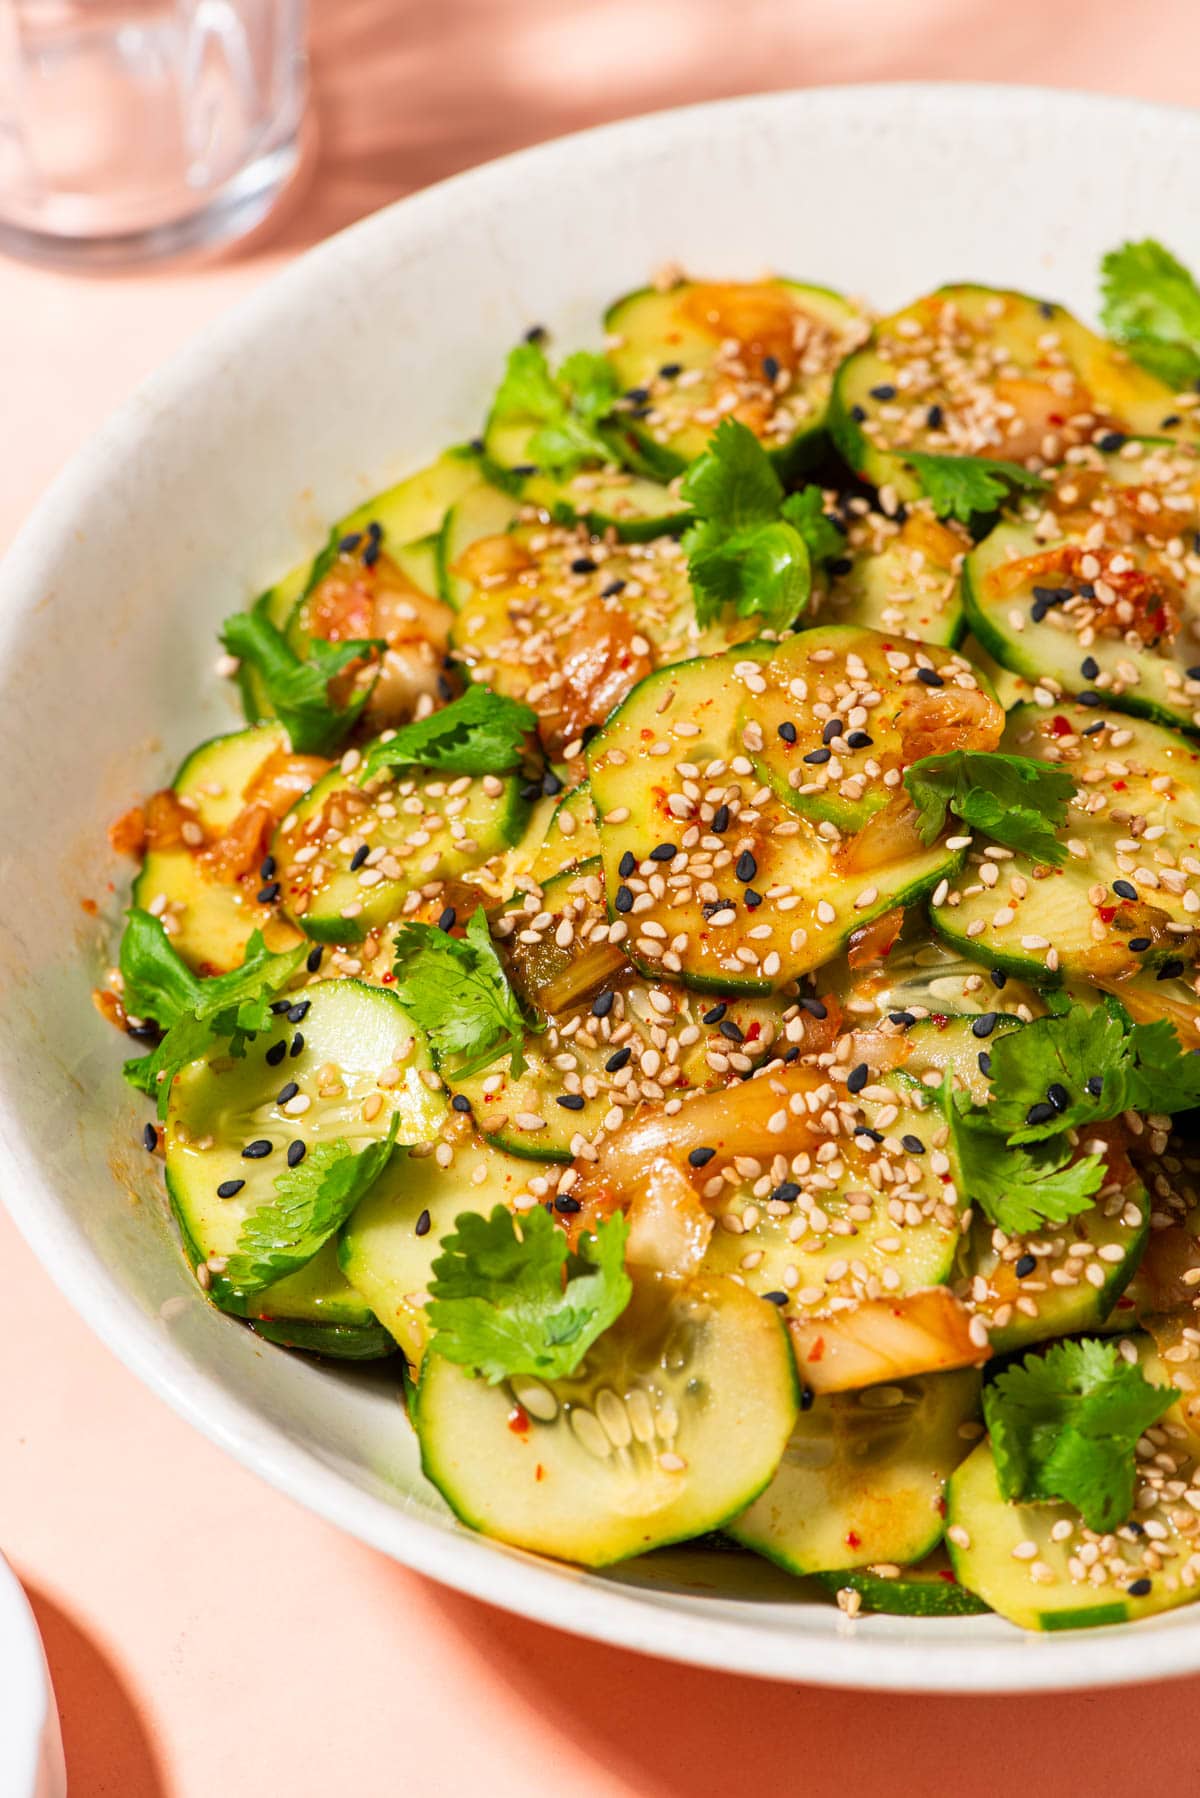 Cucumber kimchi salad in a beige bowl, garnished with cilantro and sesame seeds.